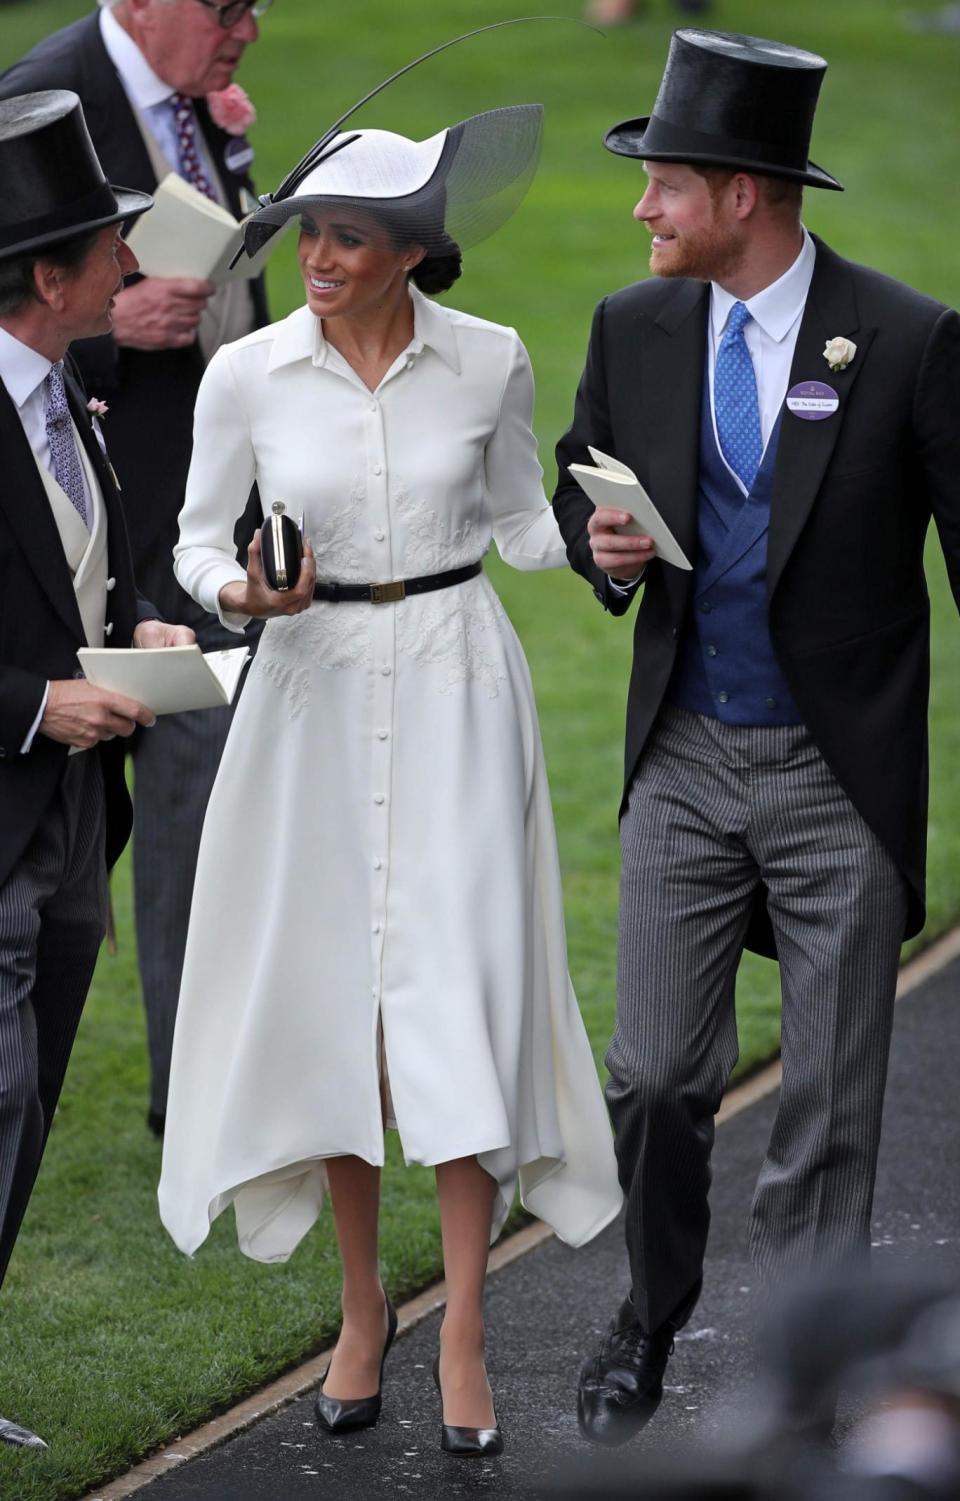 Meghan Markle wearing a white Givenchy dress (AFP/Getty Images)